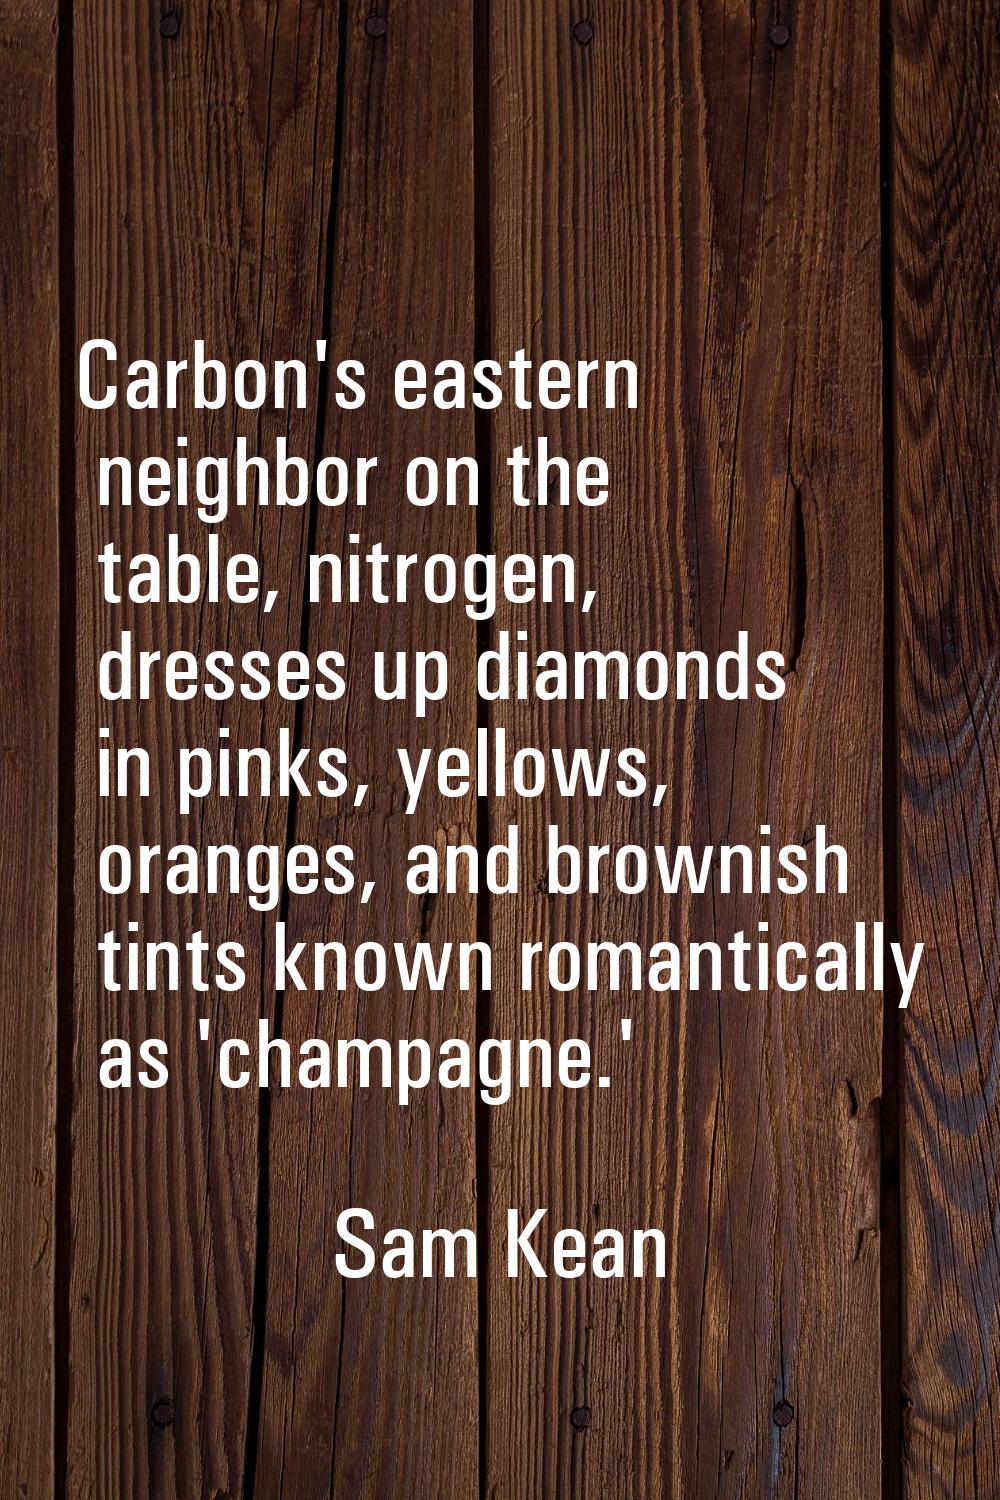 Carbon's eastern neighbor on the table, nitrogen, dresses up diamonds in pinks, yellows, oranges, a